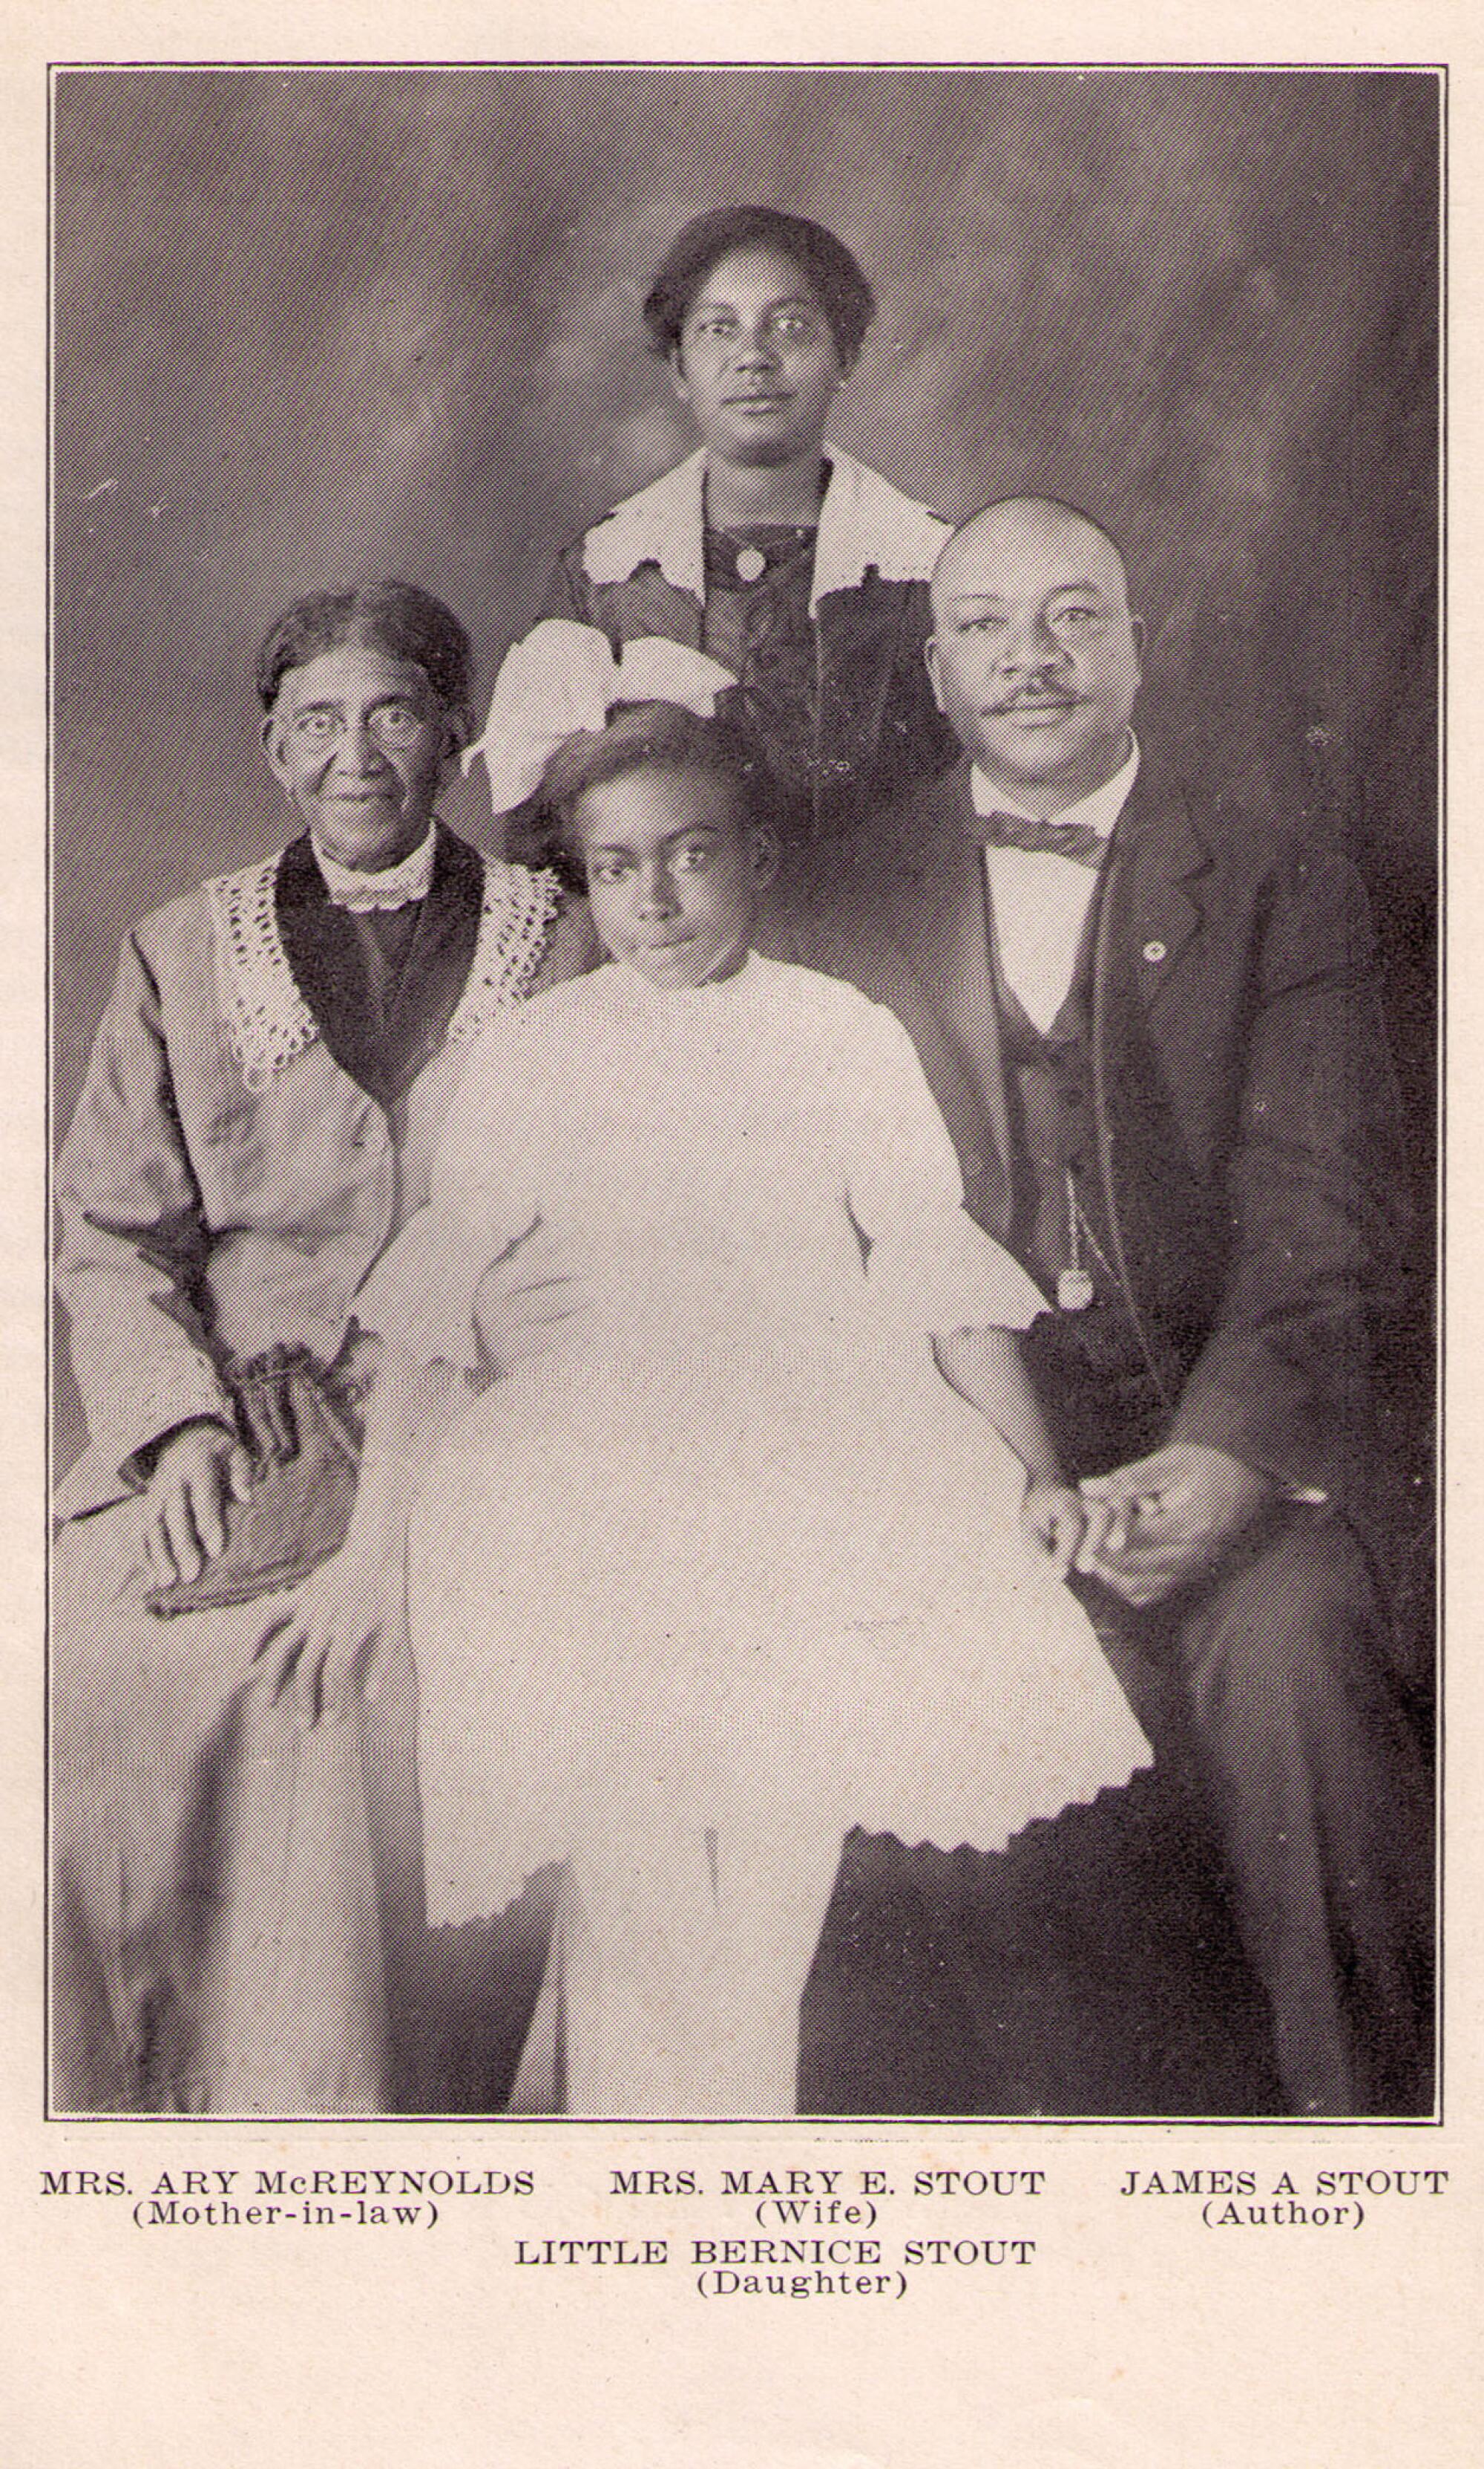 The Rev. James Stout with his wife, daughter and mother-in-law, in a photo taken in 1919.